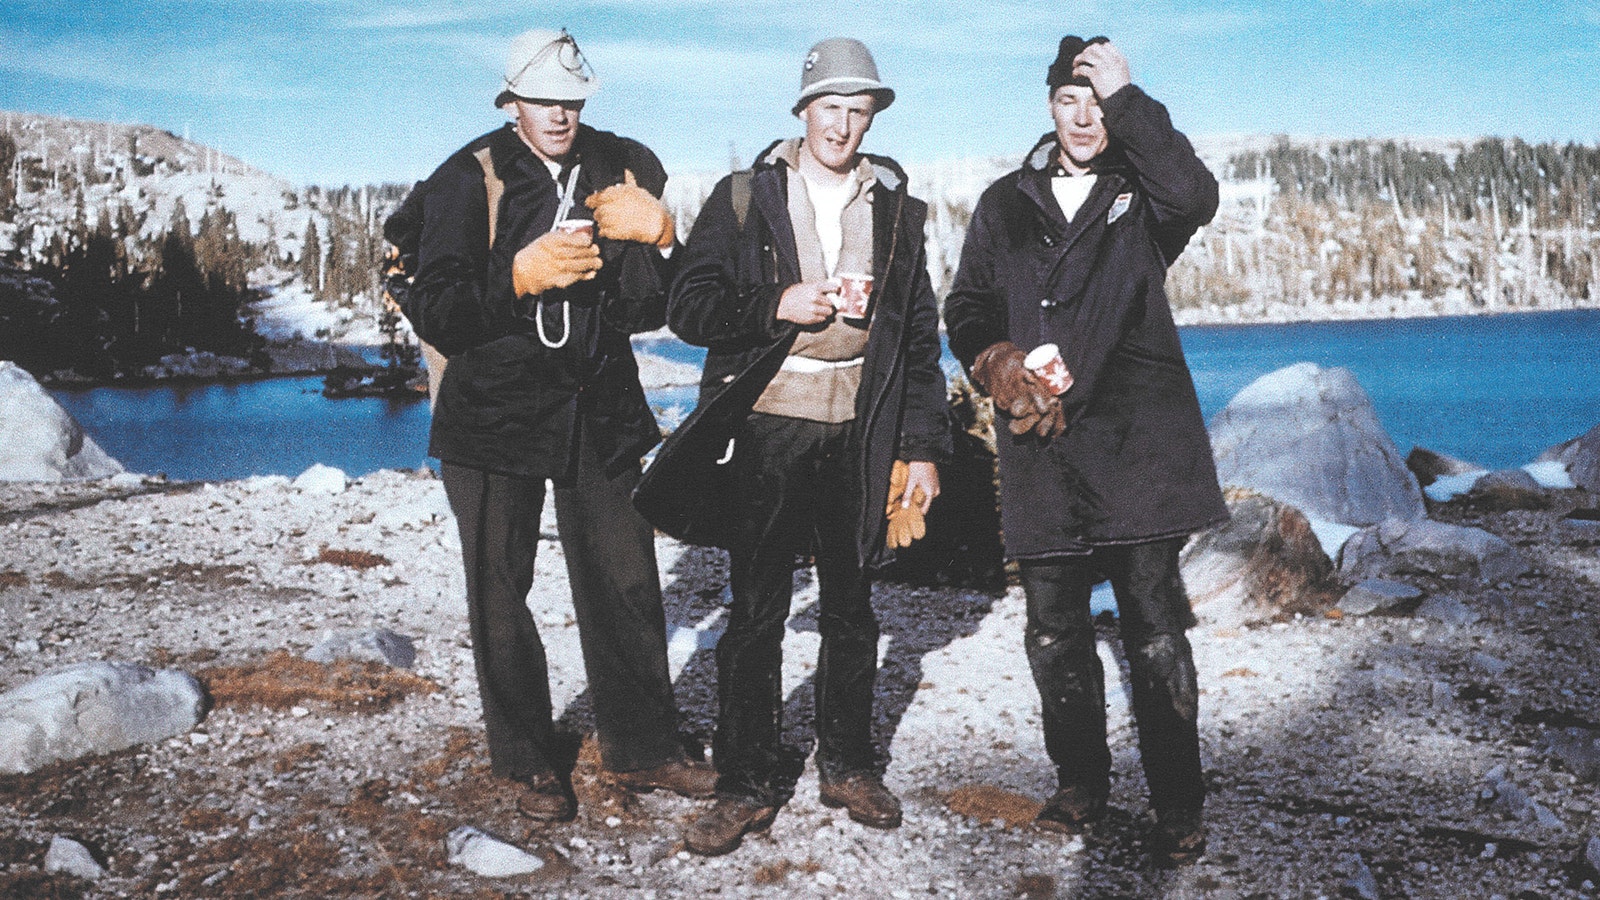 Three members of the University of Wyoming college student rescue team that served at Medicine Bow Peak in 1955 included Robert Harrower, left, Courtney Skinner and Diggs Lewis.